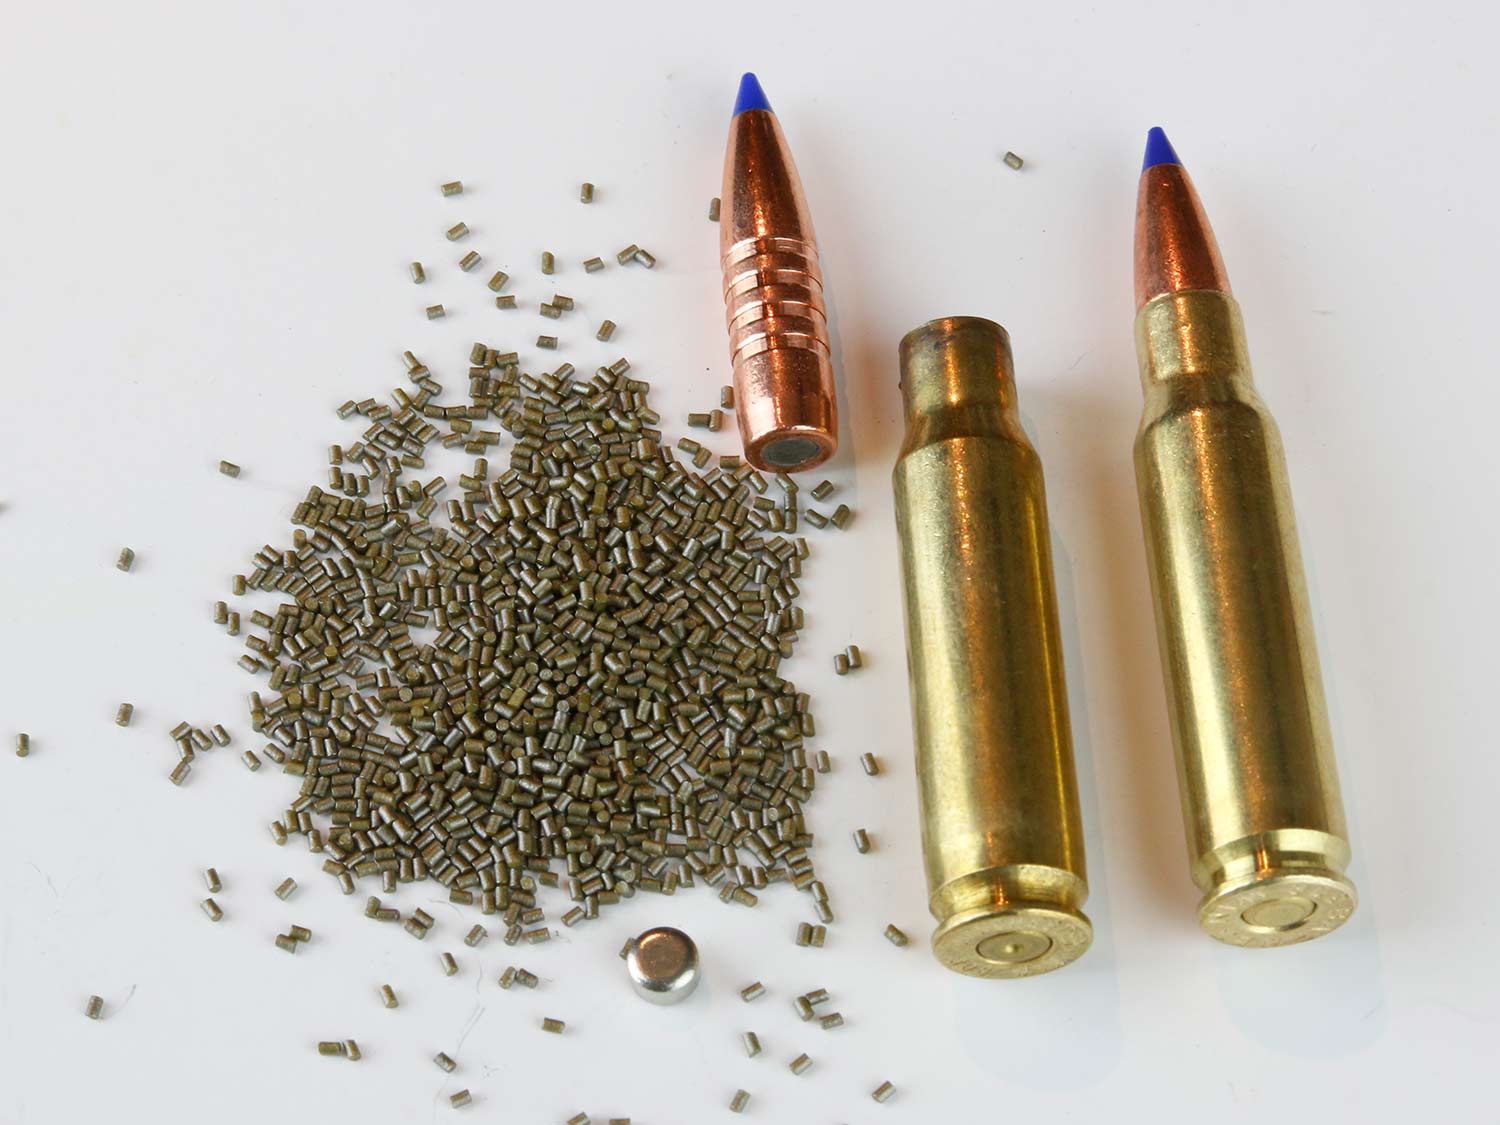 A rifle cartridge next to an emptied cartridge and bullet and gunpowder.